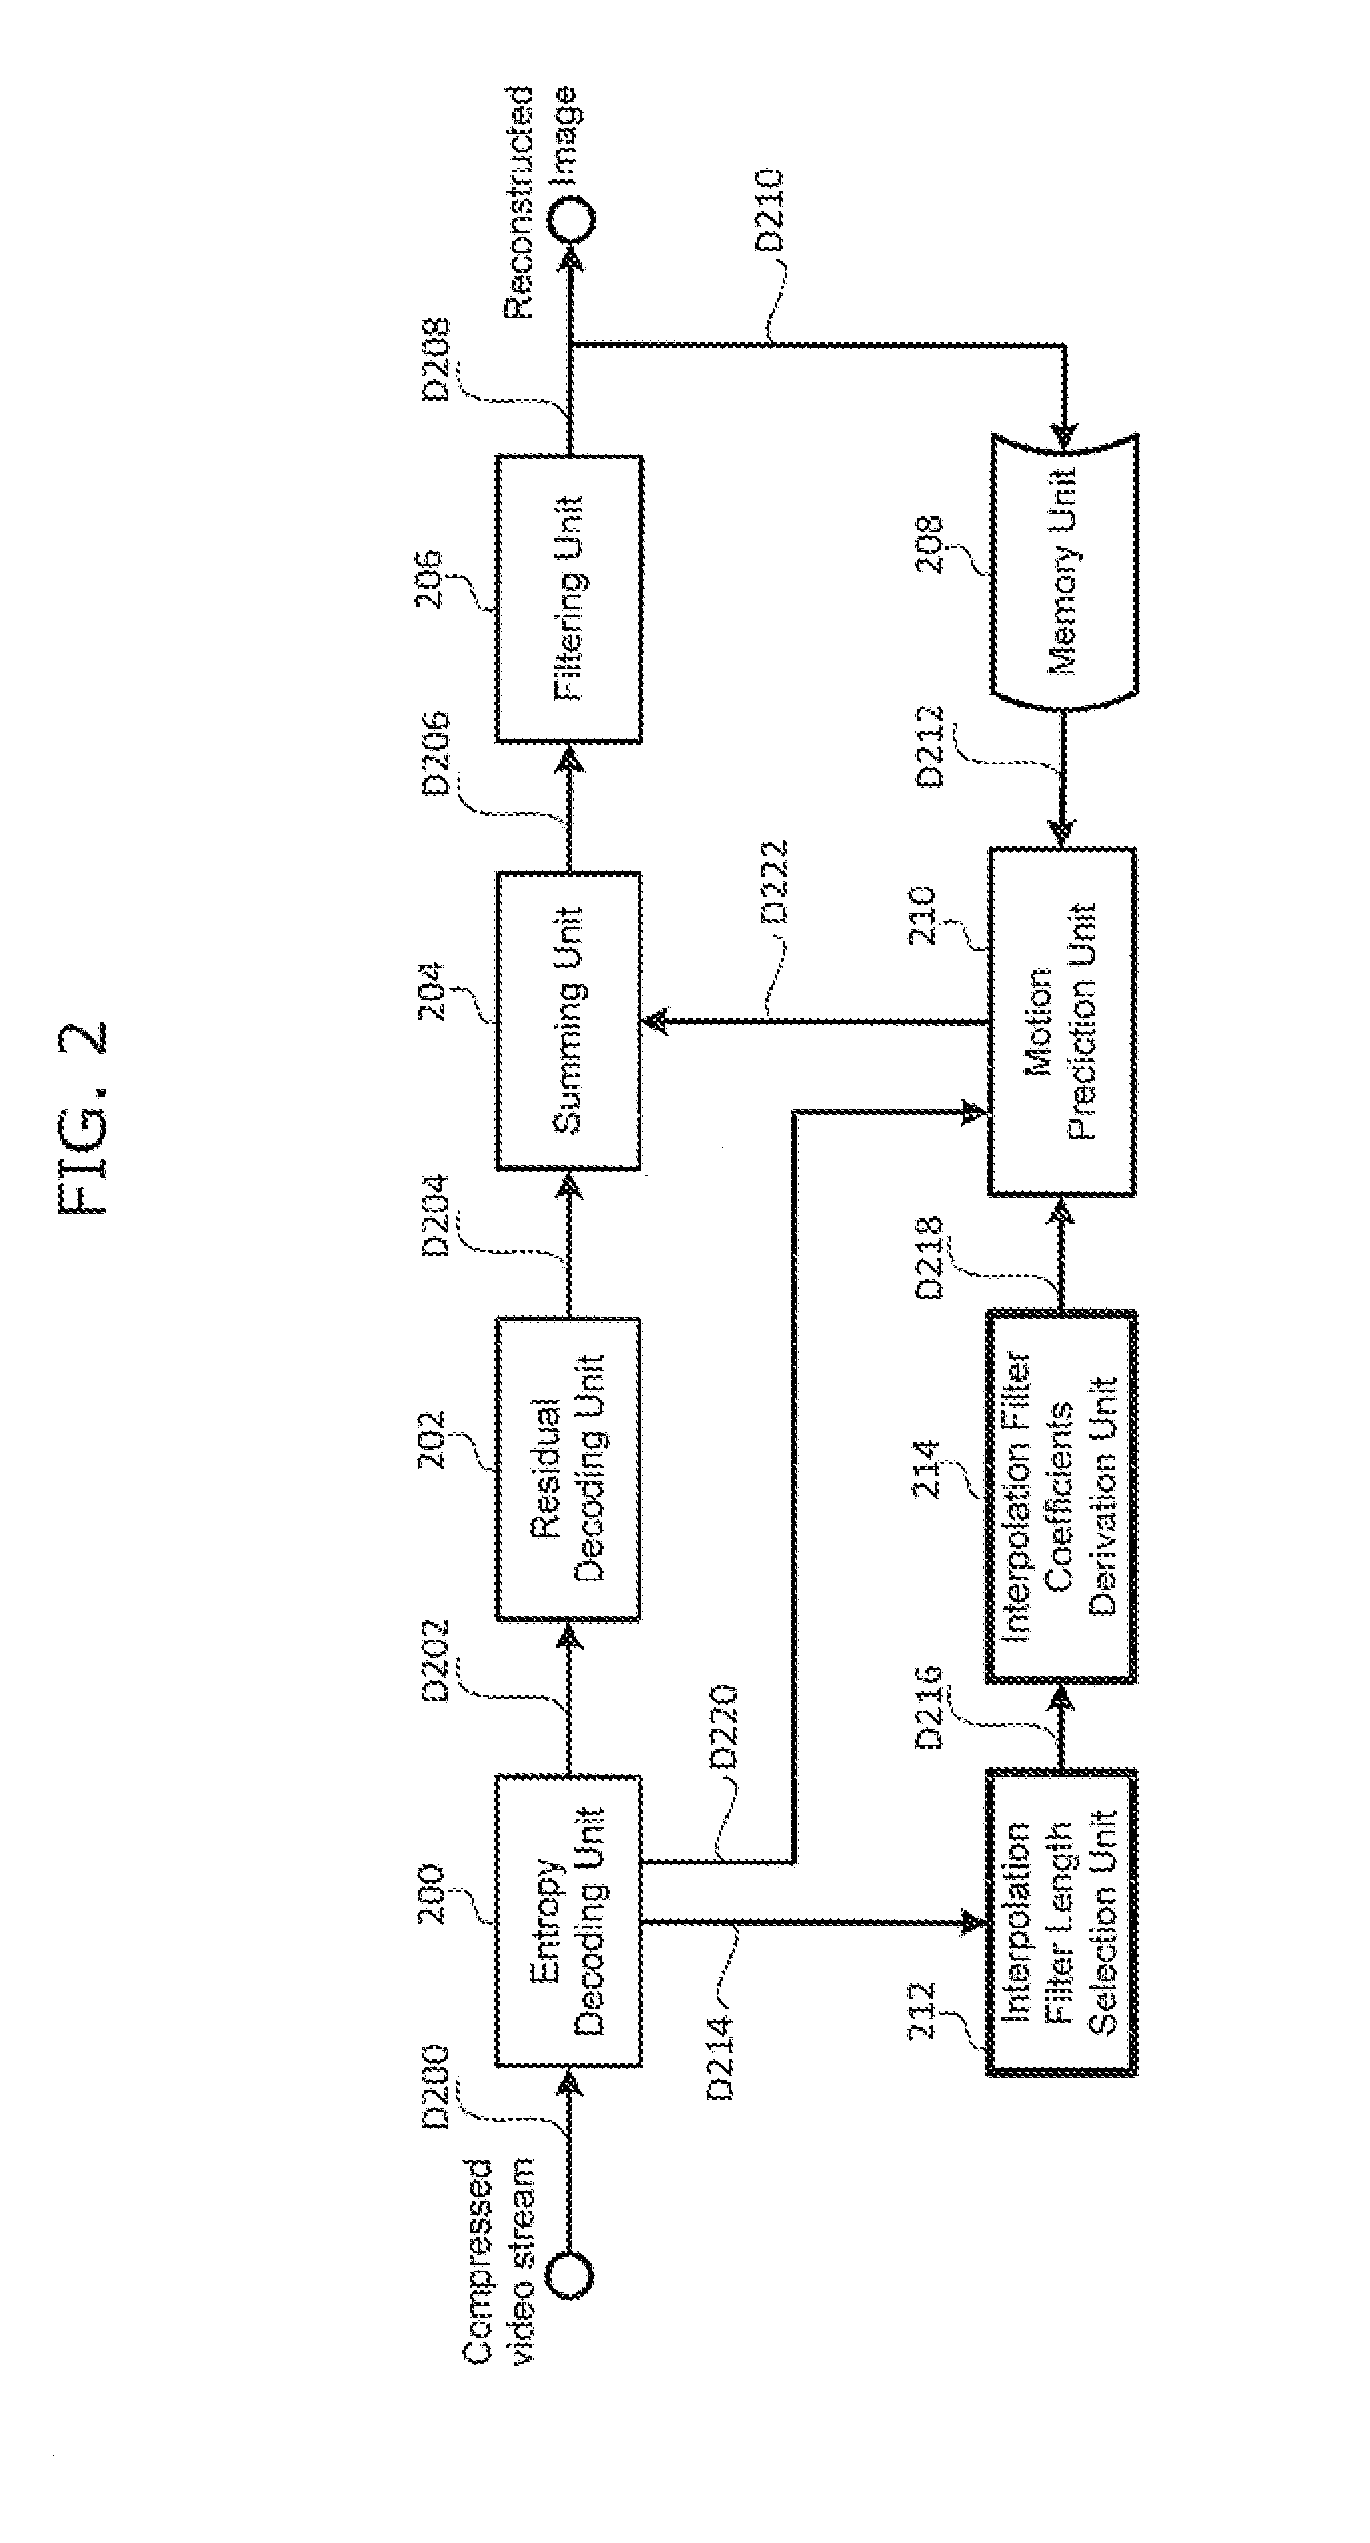 Methods and apparatuses for encoding and decoding video using adaptive interpolation filter length